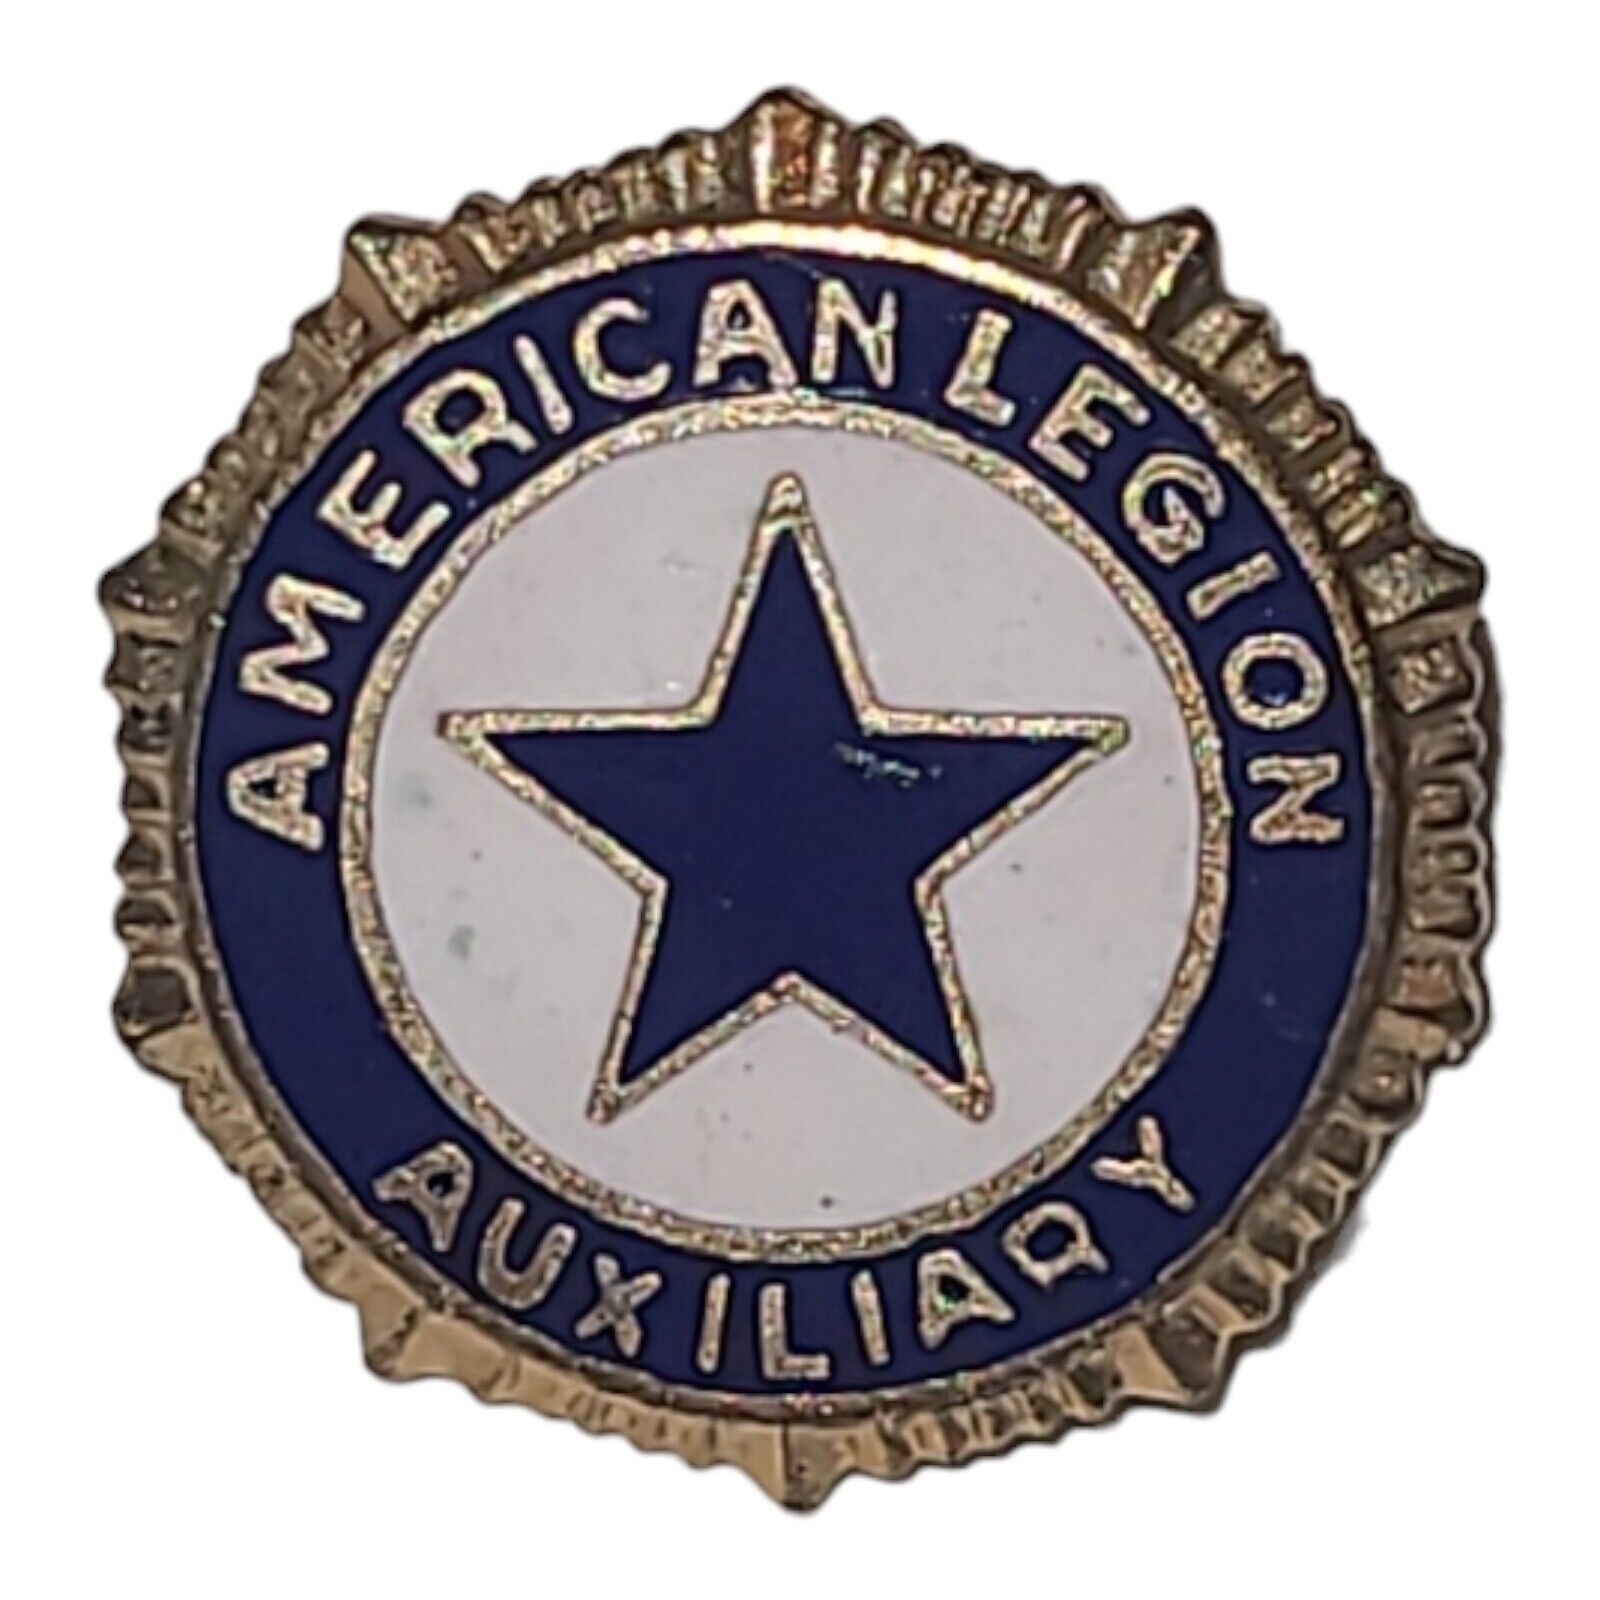 Vintage Antique Small American Legion Auxiliary Pin A&R Co Pat. June 1920